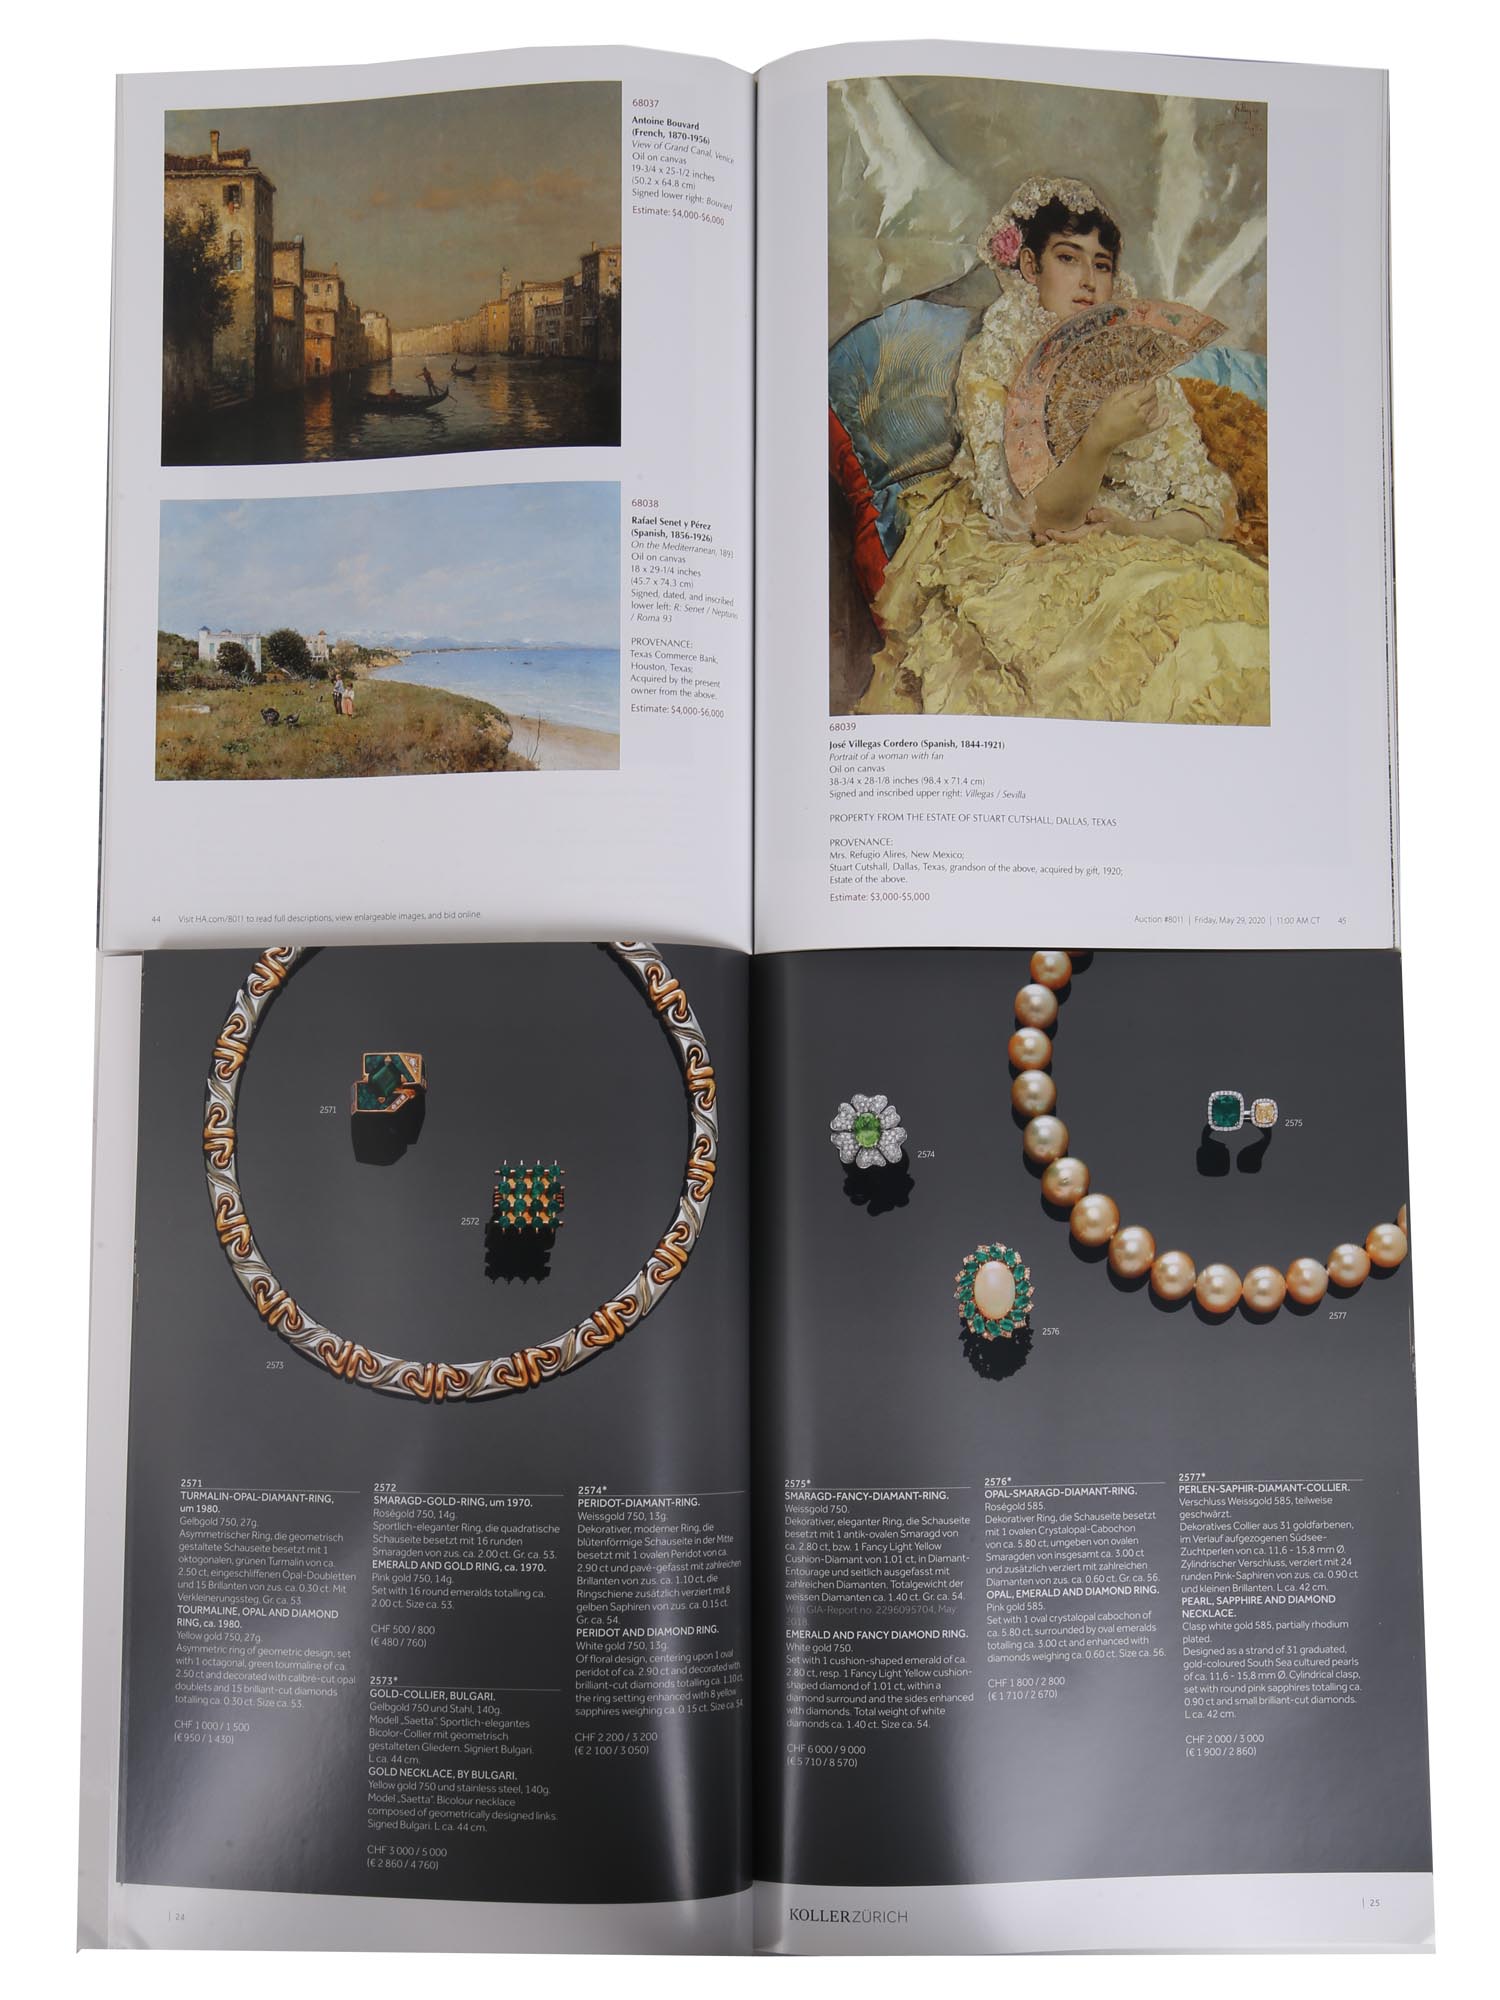 COLLECTION OF ART AUCTION CATALOGS AND BOOKS PIC-3